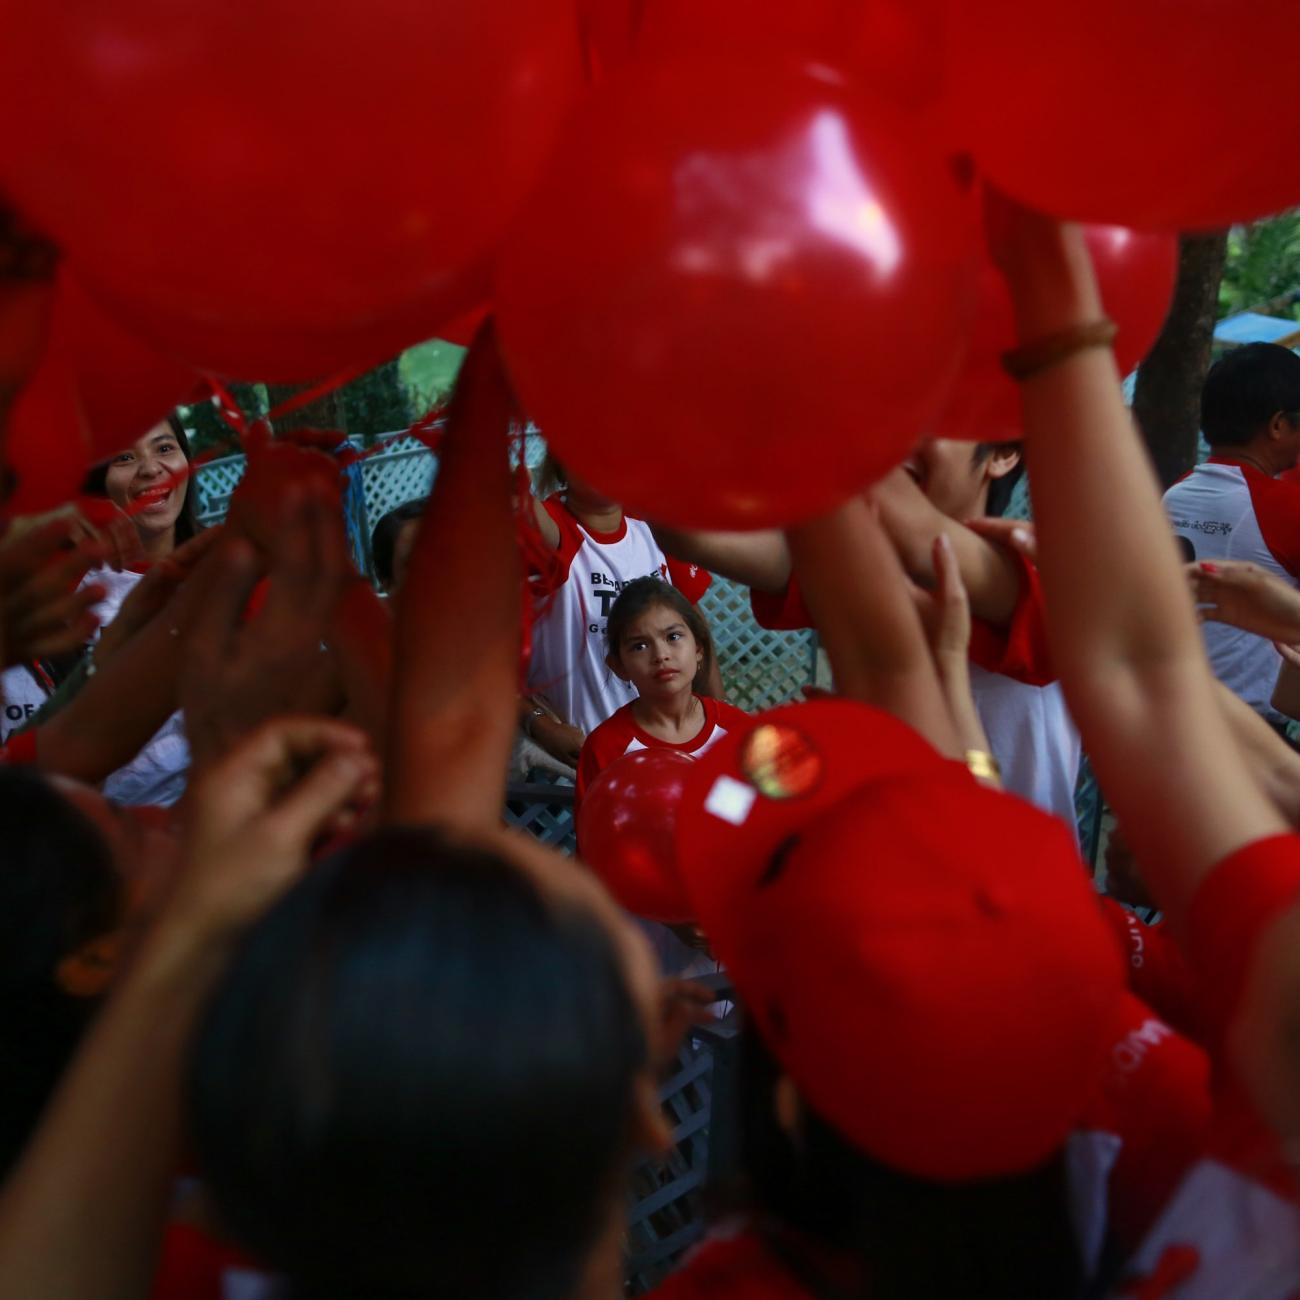 People take balloons before a march ahead of World AIDS Day 2013 at Kandawgyi garden in Yangon November 30, 2013. About one thousand people, including HIV/Aids patients, attended the event.